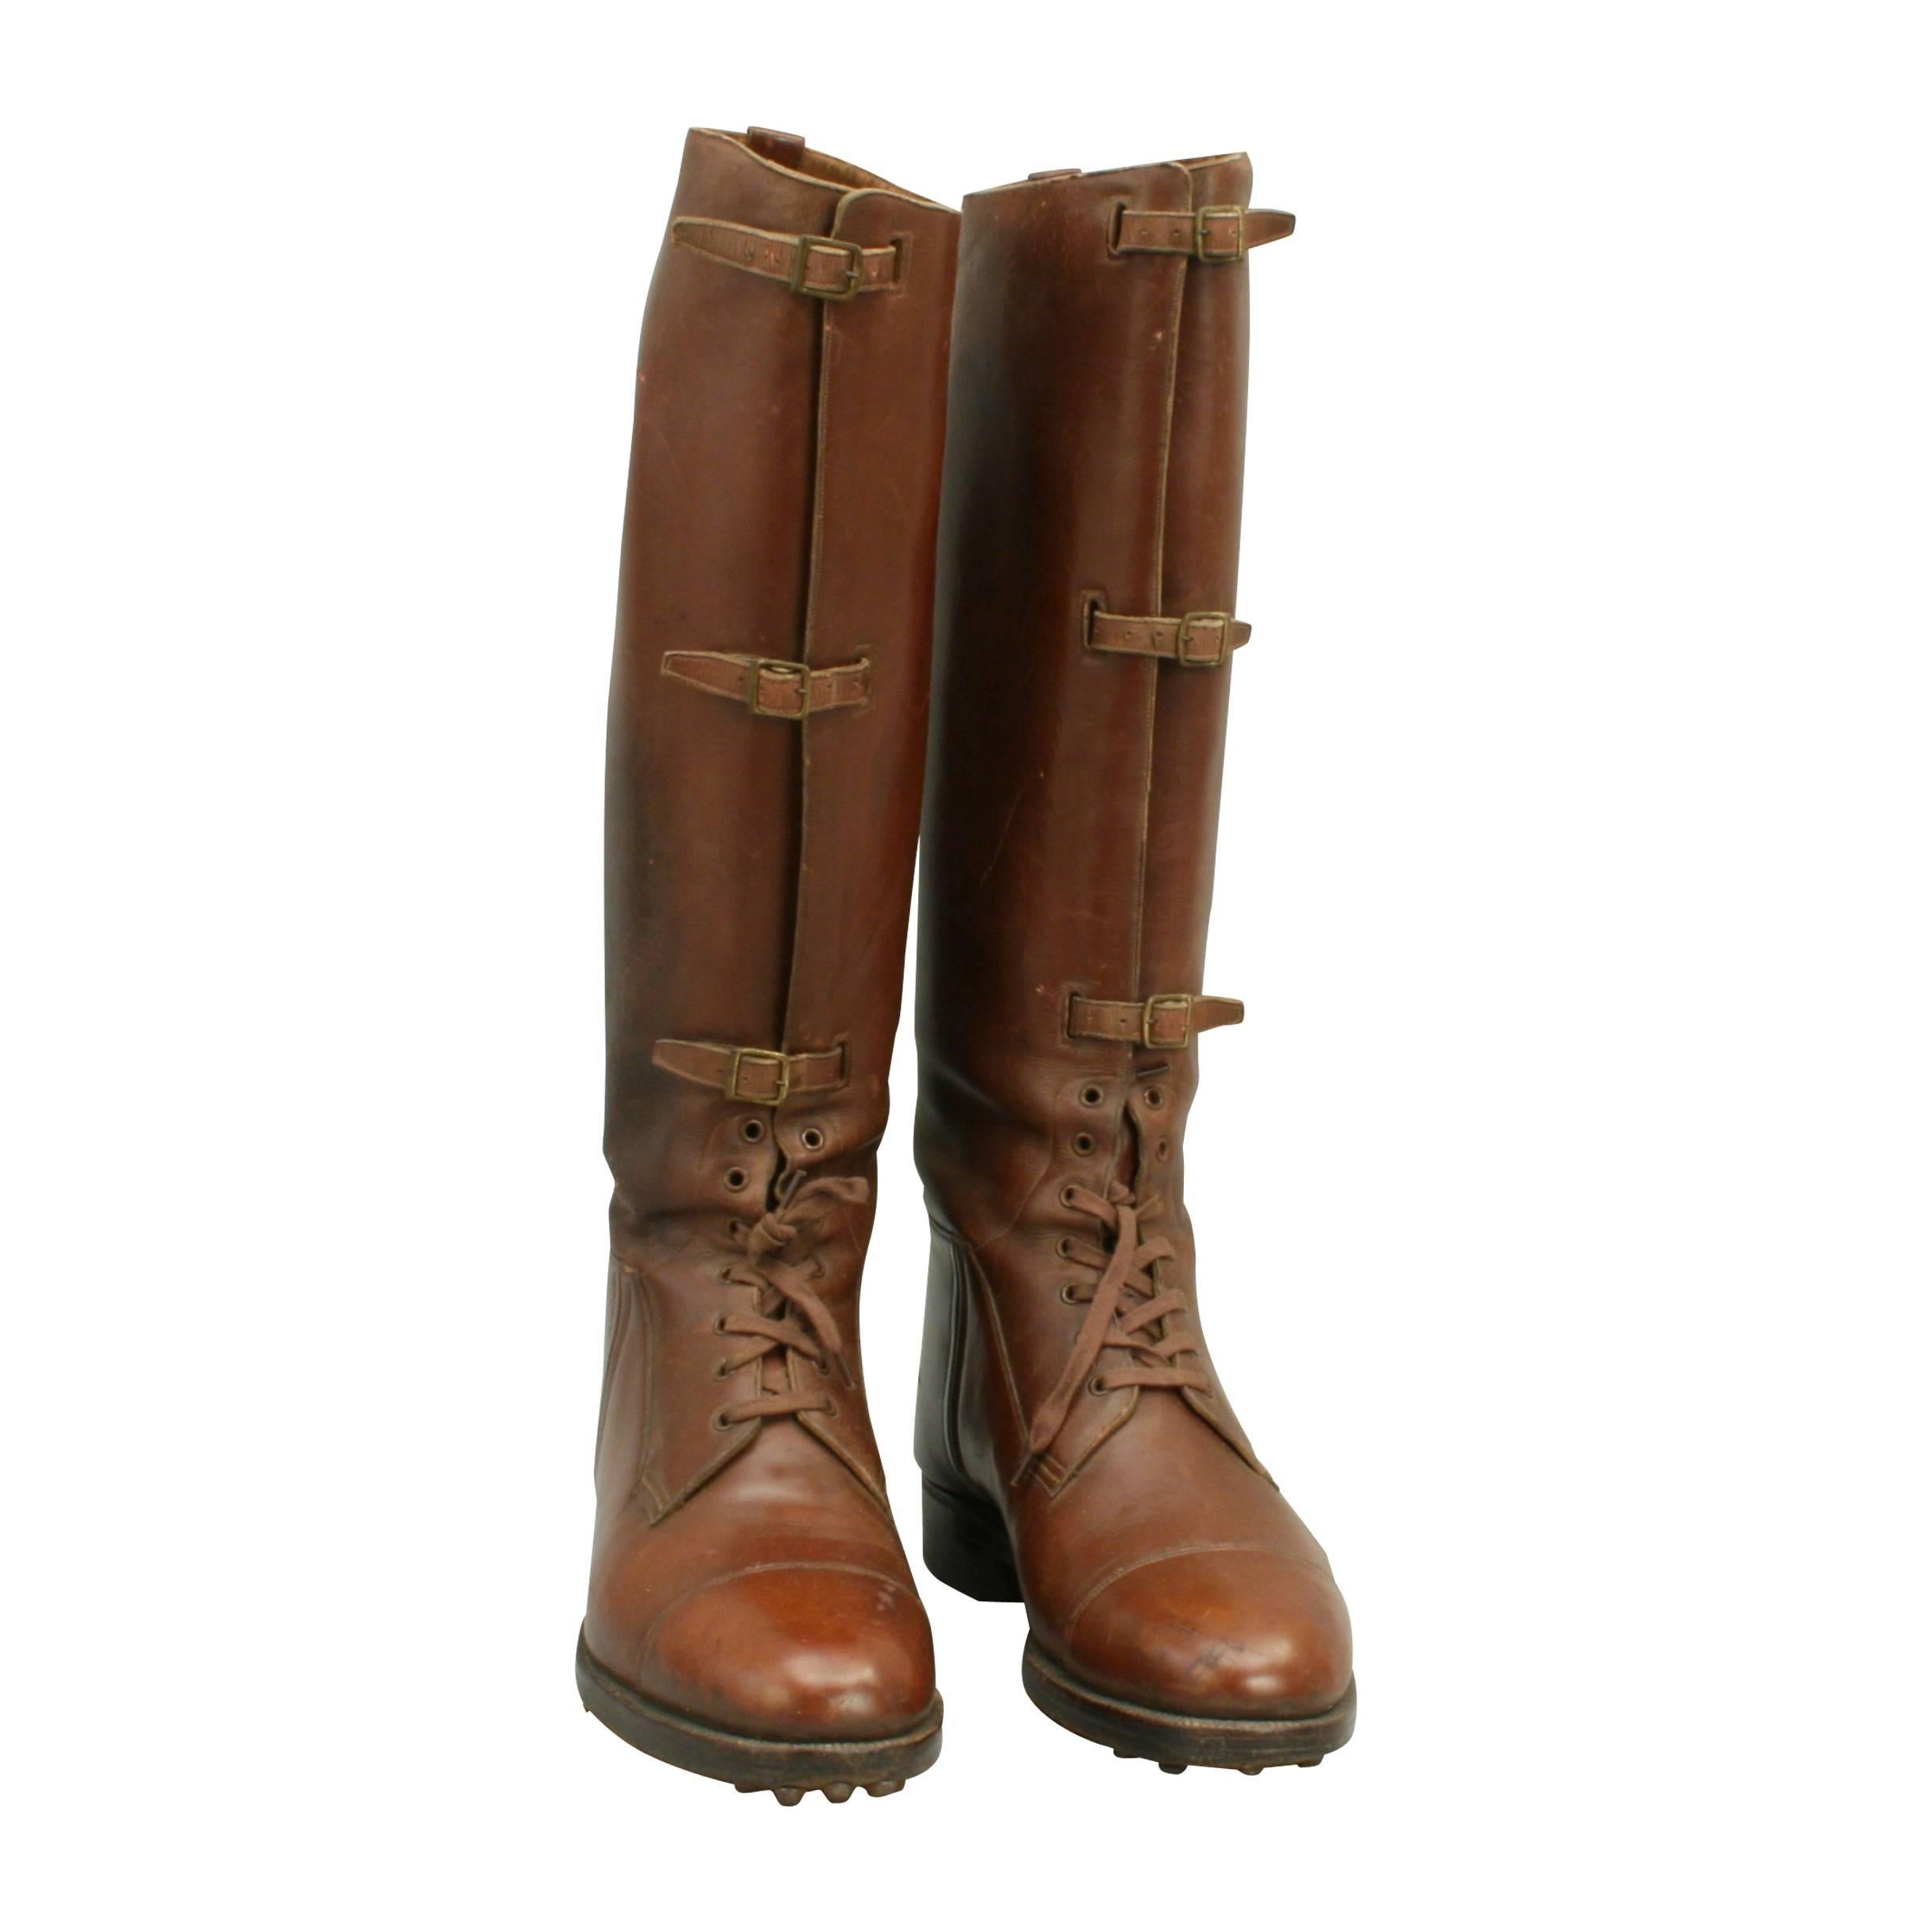 Vintage pair of brown leather field / riding boots.
A very good pair of tan leather field boots, the soles have metal hobnails added for grip. The leather on these brown boots is in very good condition with all buckles intact.
Probably size